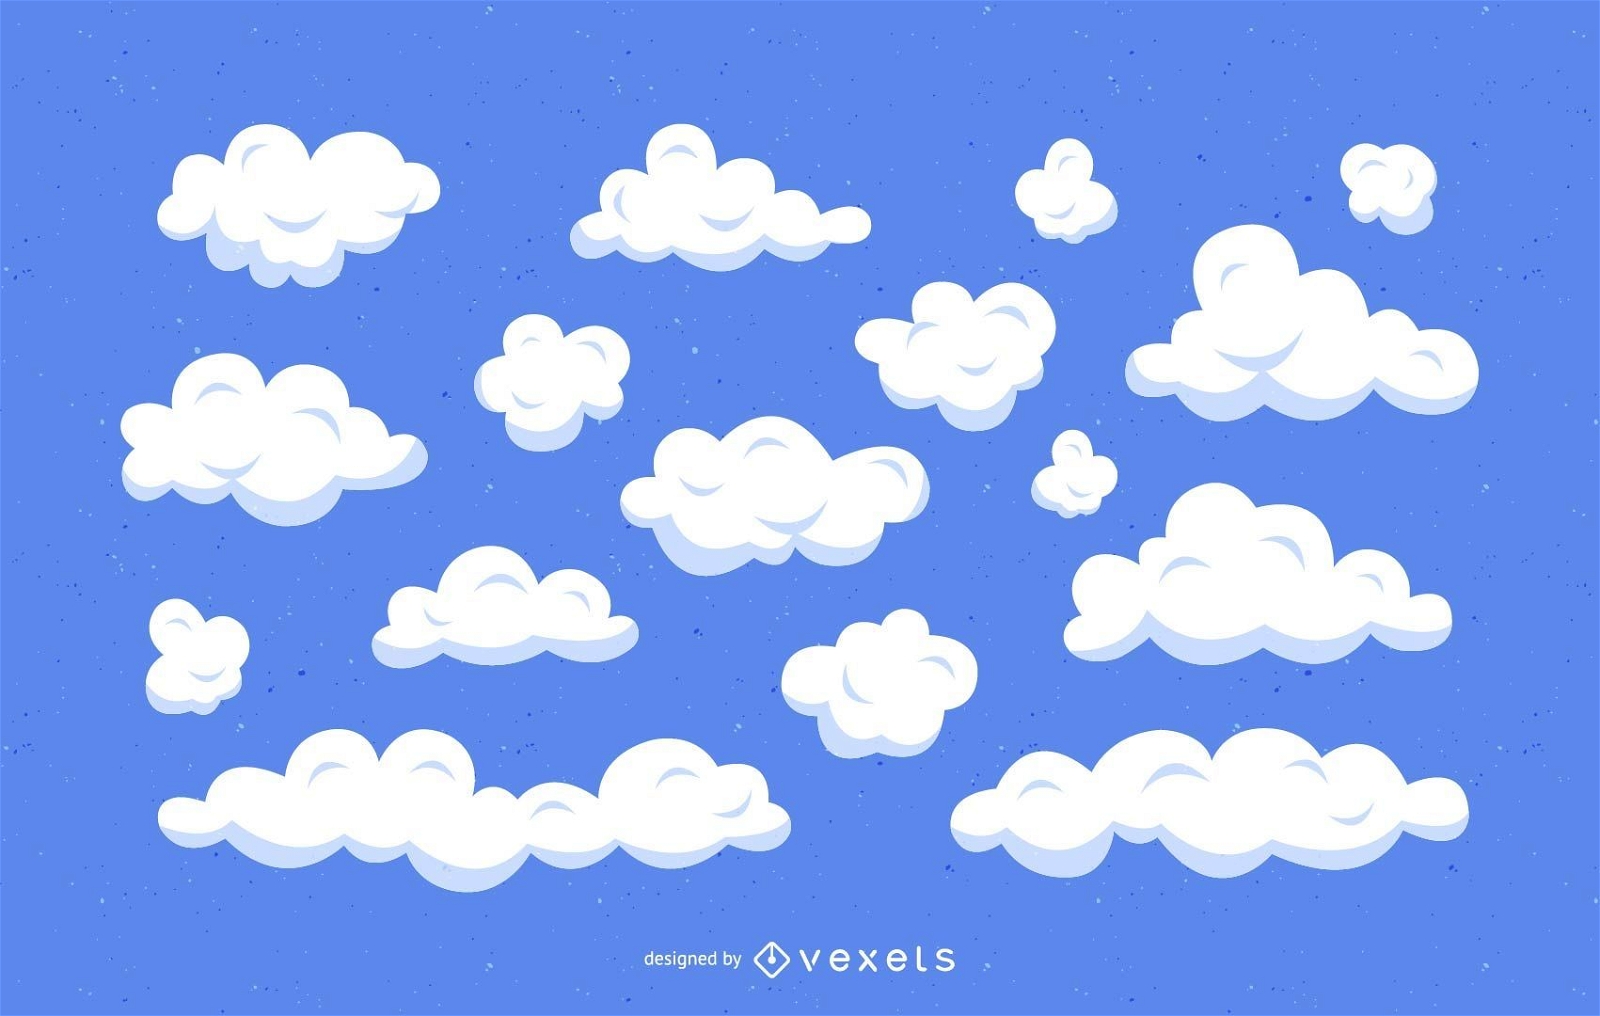 clouds vector background